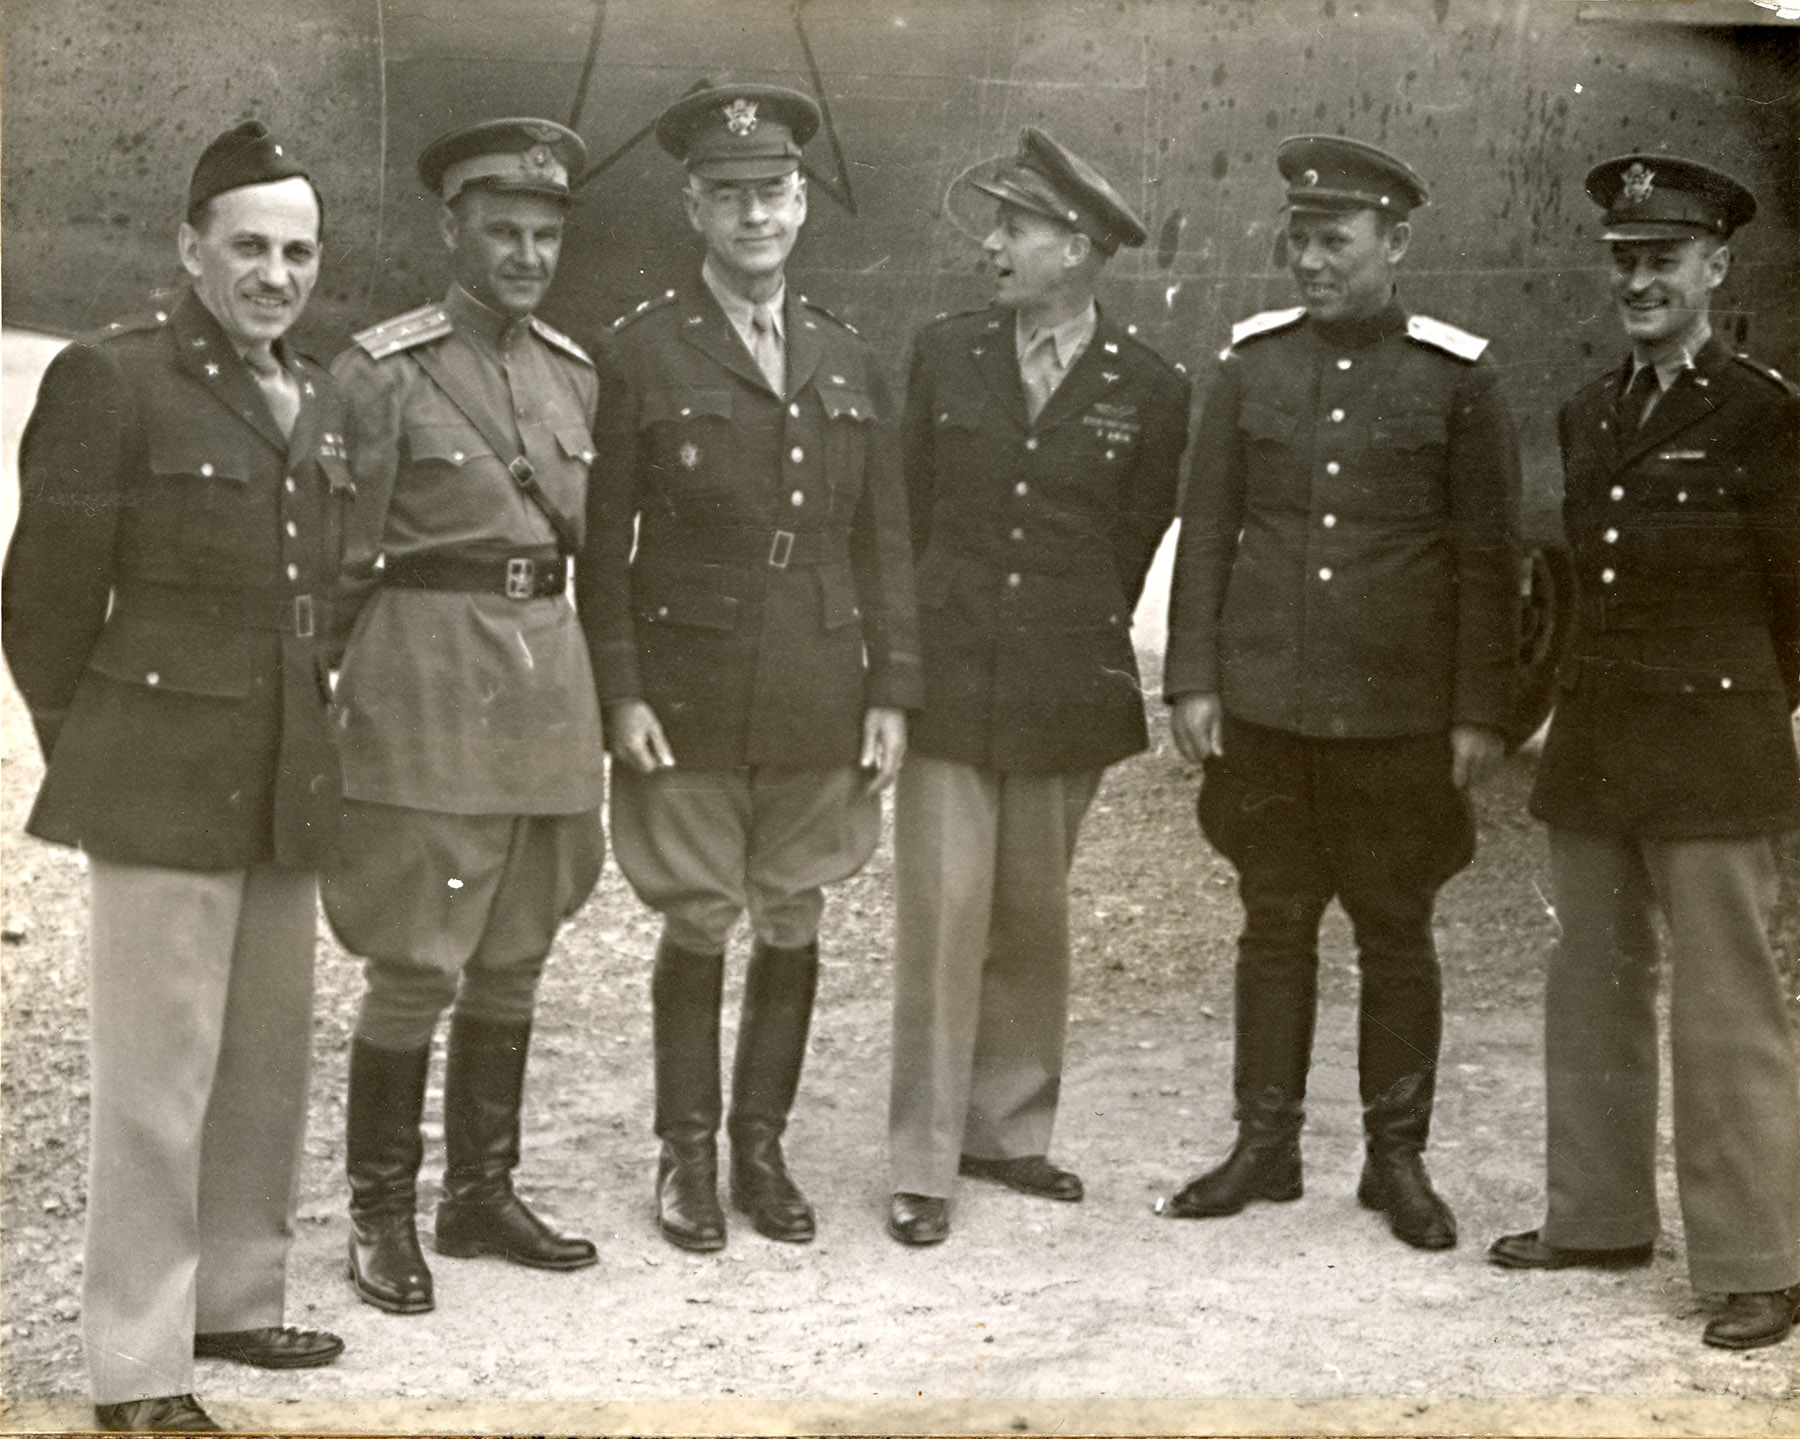 Six military officers stand before an airplane